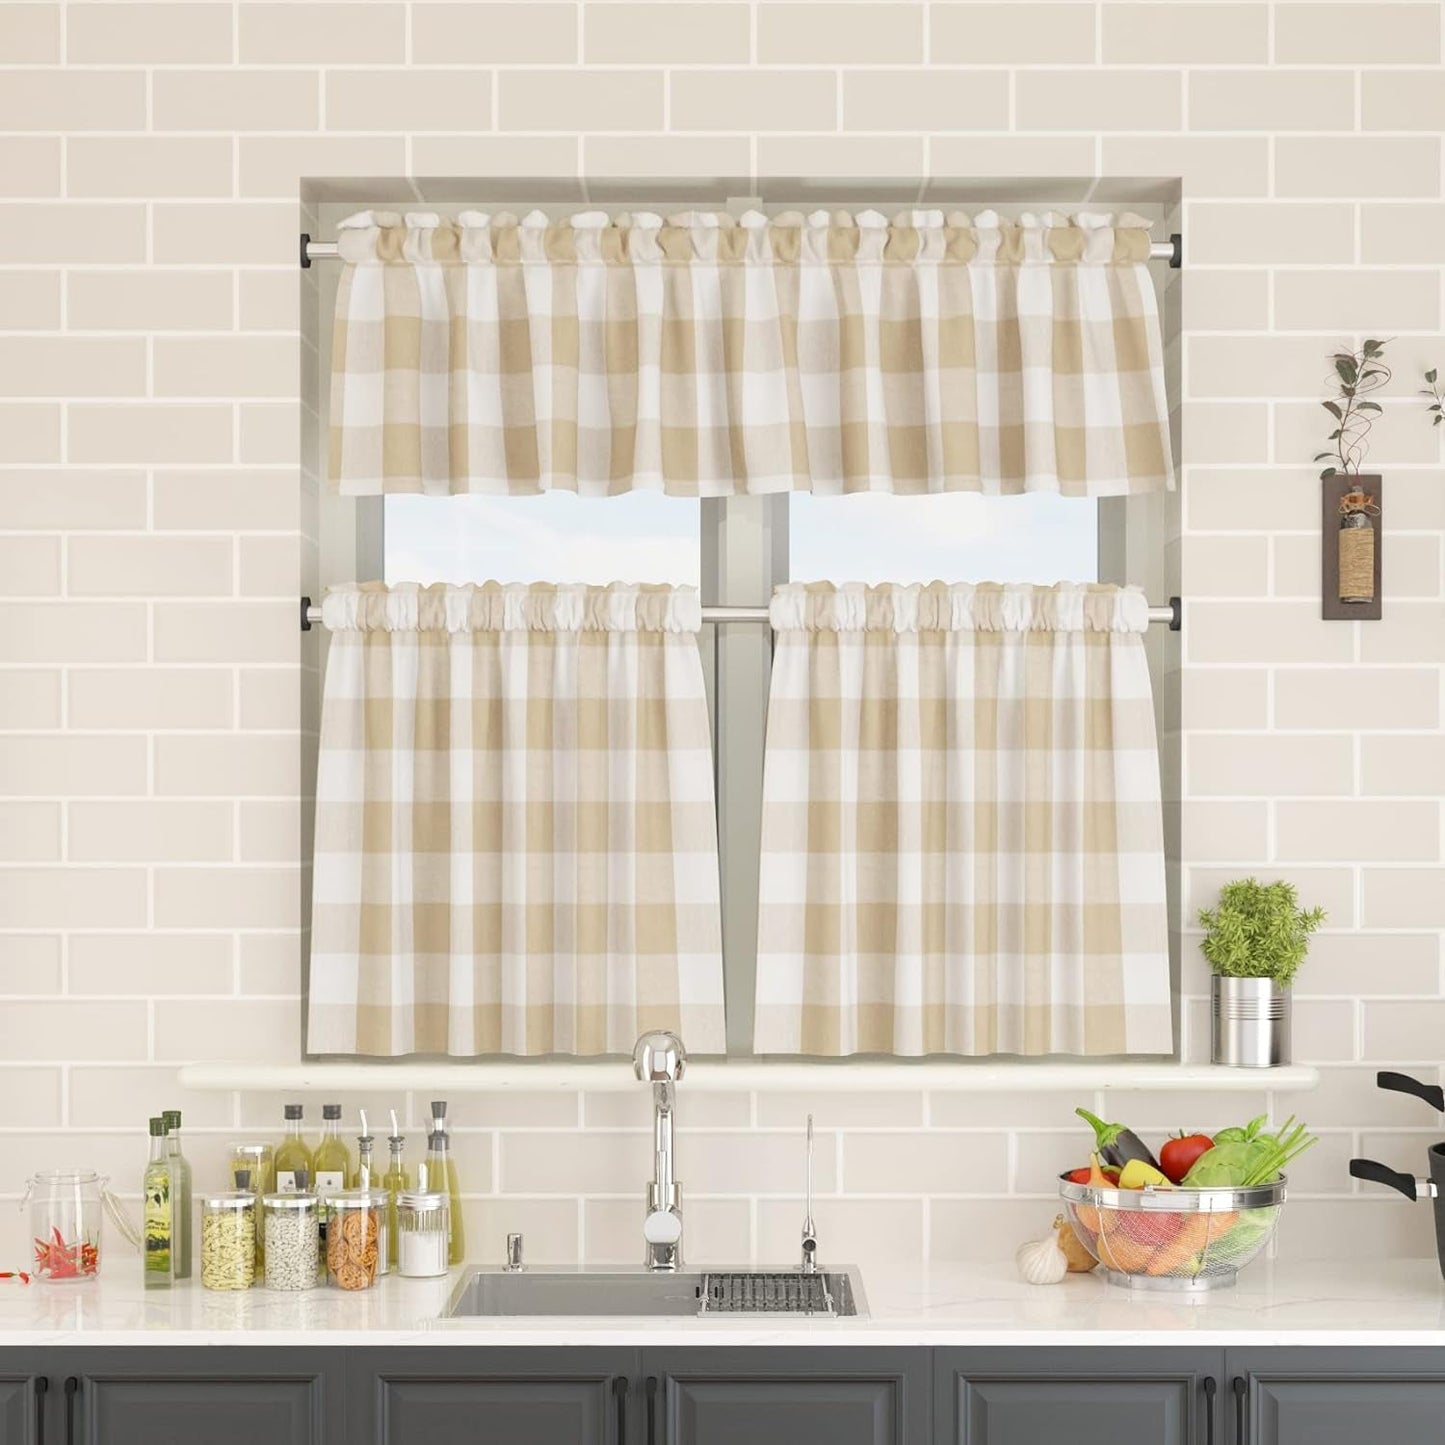 2 Pack Buffalo Check Valances Gingham Plaid Window Treatment Living Room 18 Inches Long Classic Bedroom Bathroom Rod Pocket Country Farmhouse Kitchen Window Curtain Valances - 54"X18" Beige & White